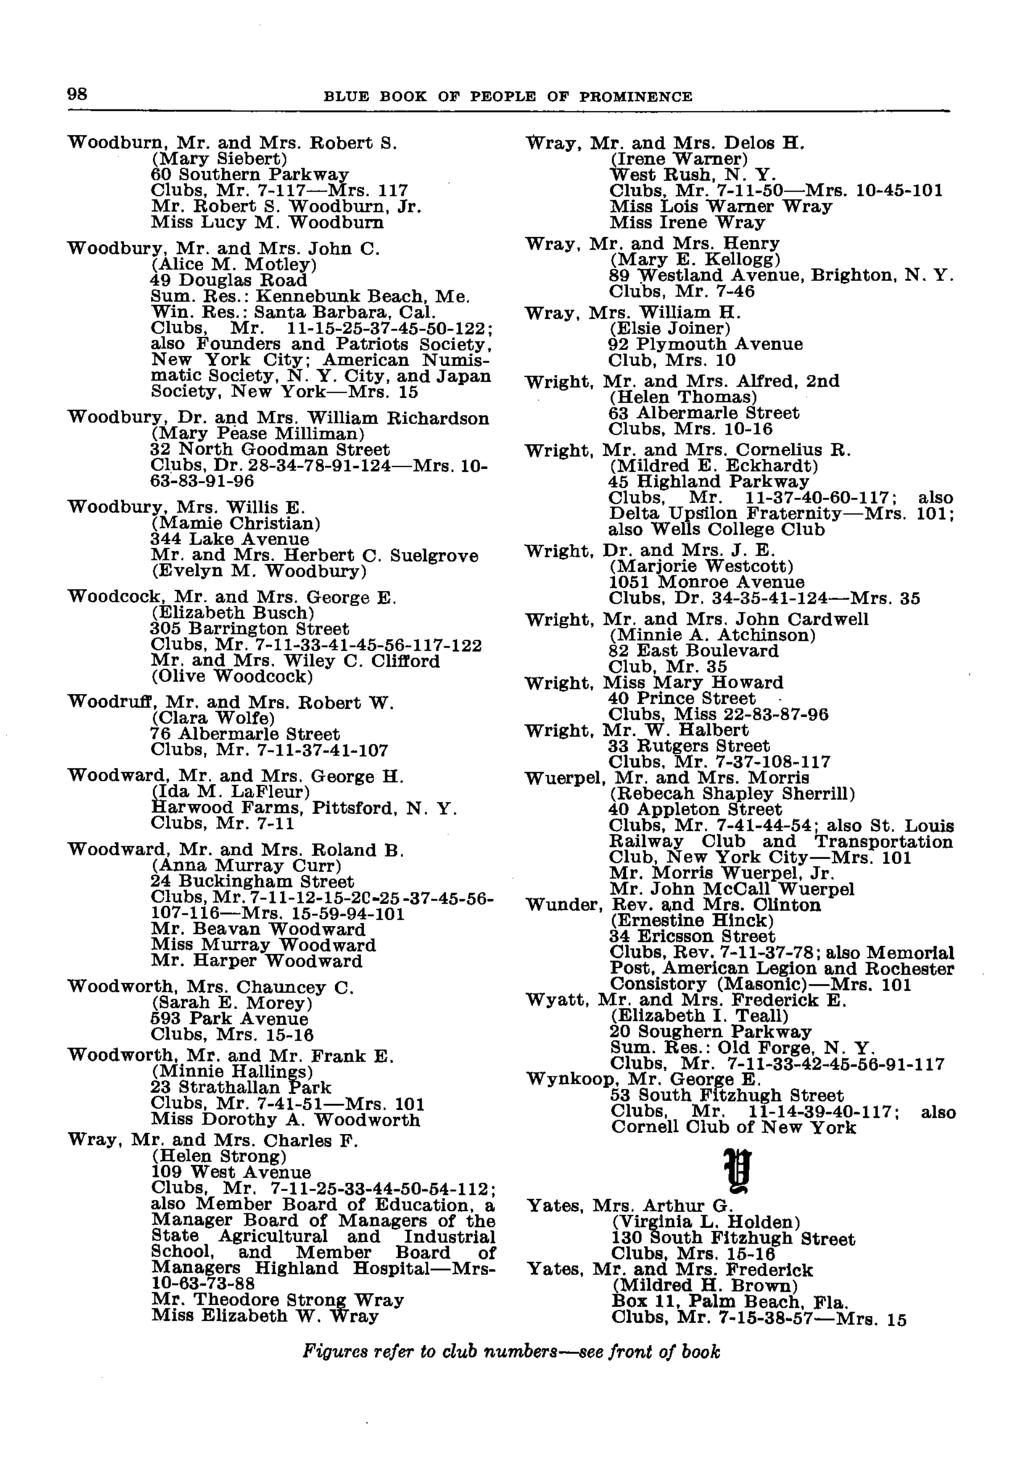 BLUE BOOK OP PEOPLE OF PROMINENCE Woodburn, Mr. and Mrs. Robert S. (Mary Siebert) 60 Southern Parkway Clubs, Mr. 7-117 Mrs. 117 Mr. Robert S. Woodburn, Jr. Miss Lucy M. Woodburn Woodbury, Mr. and Mrs. John C.